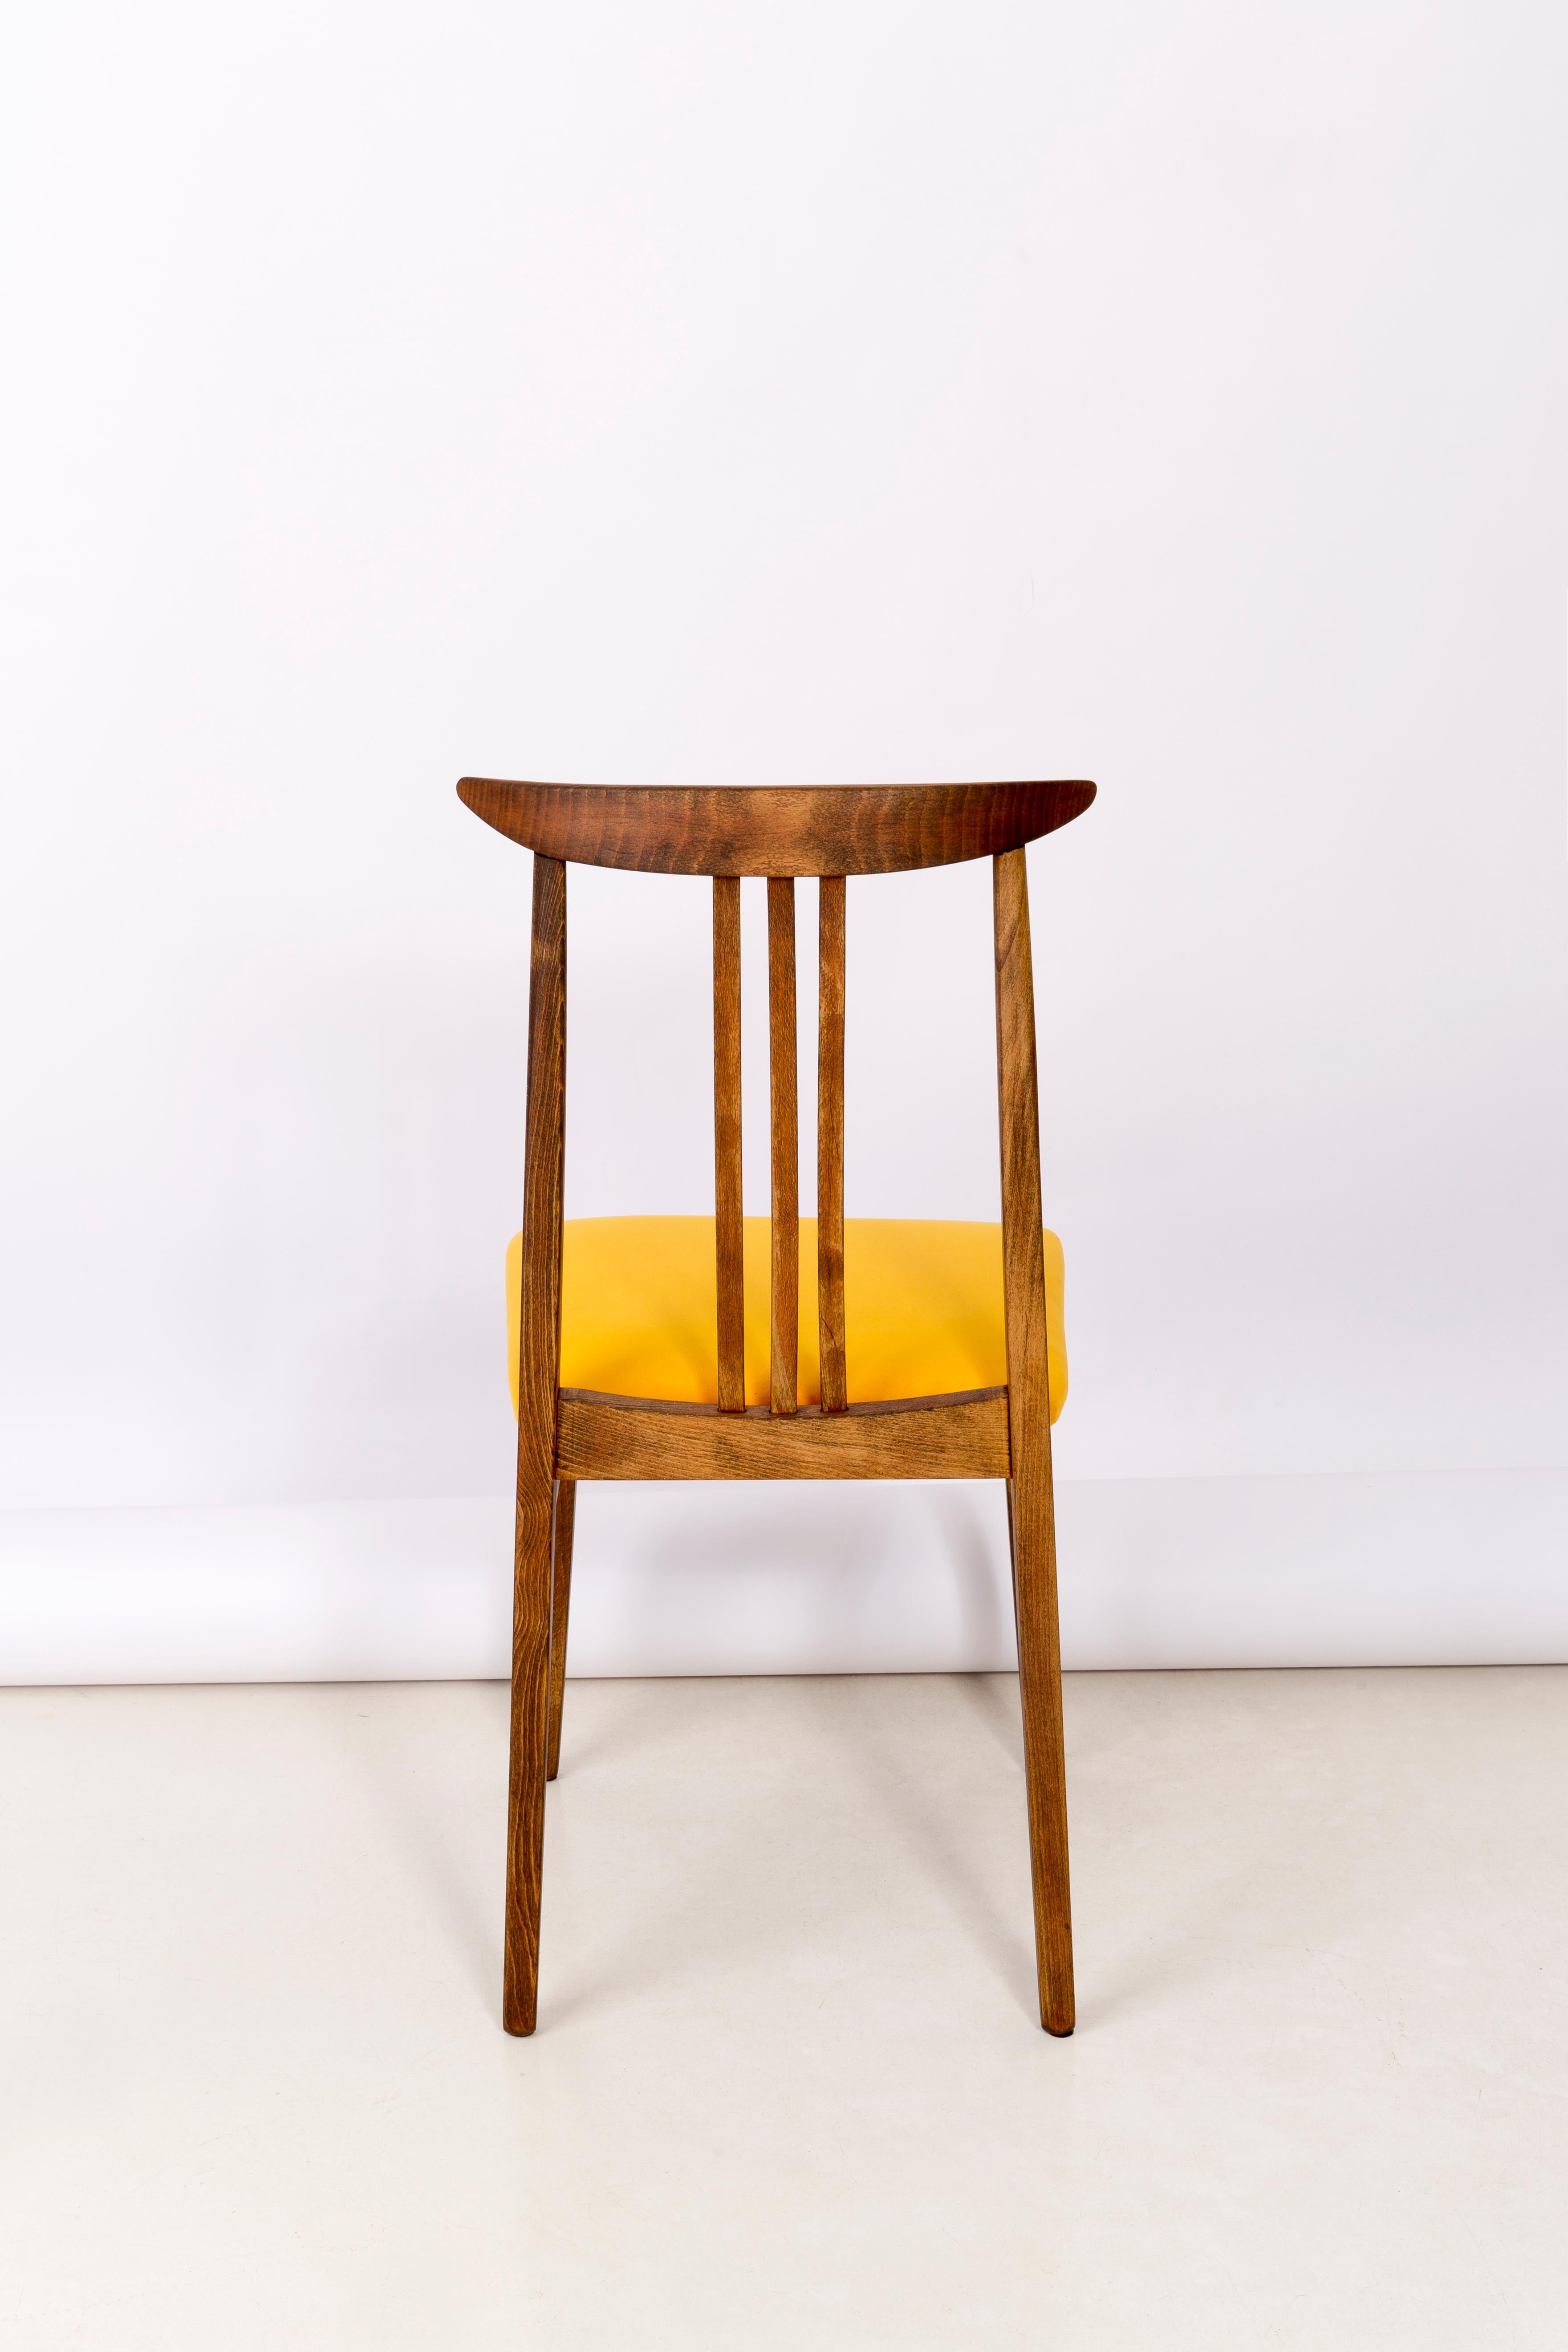 Set of Twelve Yellow Chairs, by Zielinski, Europe, 1960s For Sale 4